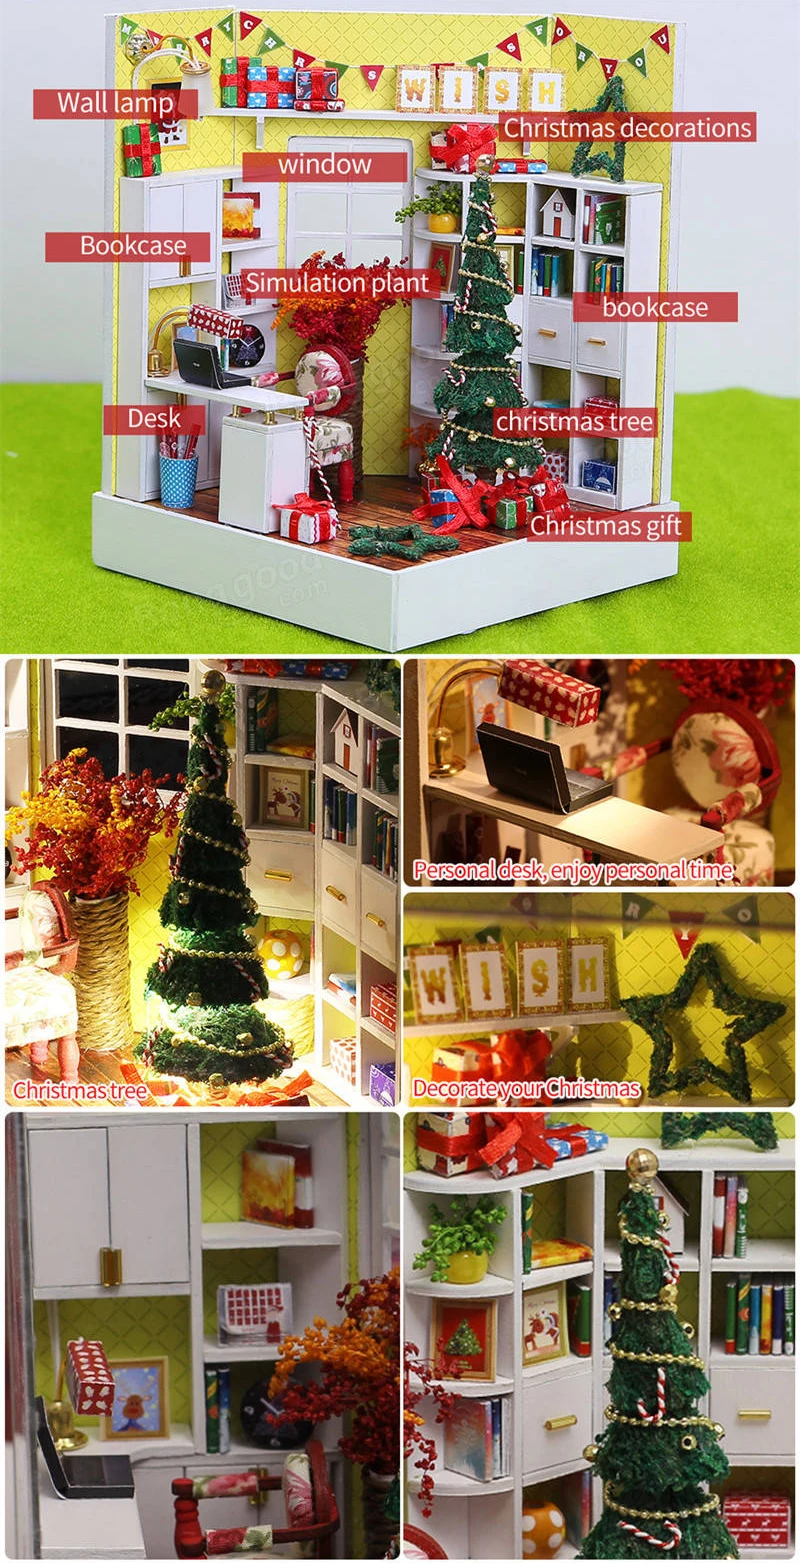 Merry-Christmas-Day-DIY-Dollhouse-With-Furniture-Light-Cover-Gift-Decor-Collection-Wooden-DIY-Handmade-Box-Theatre-Miniature-Box (14)